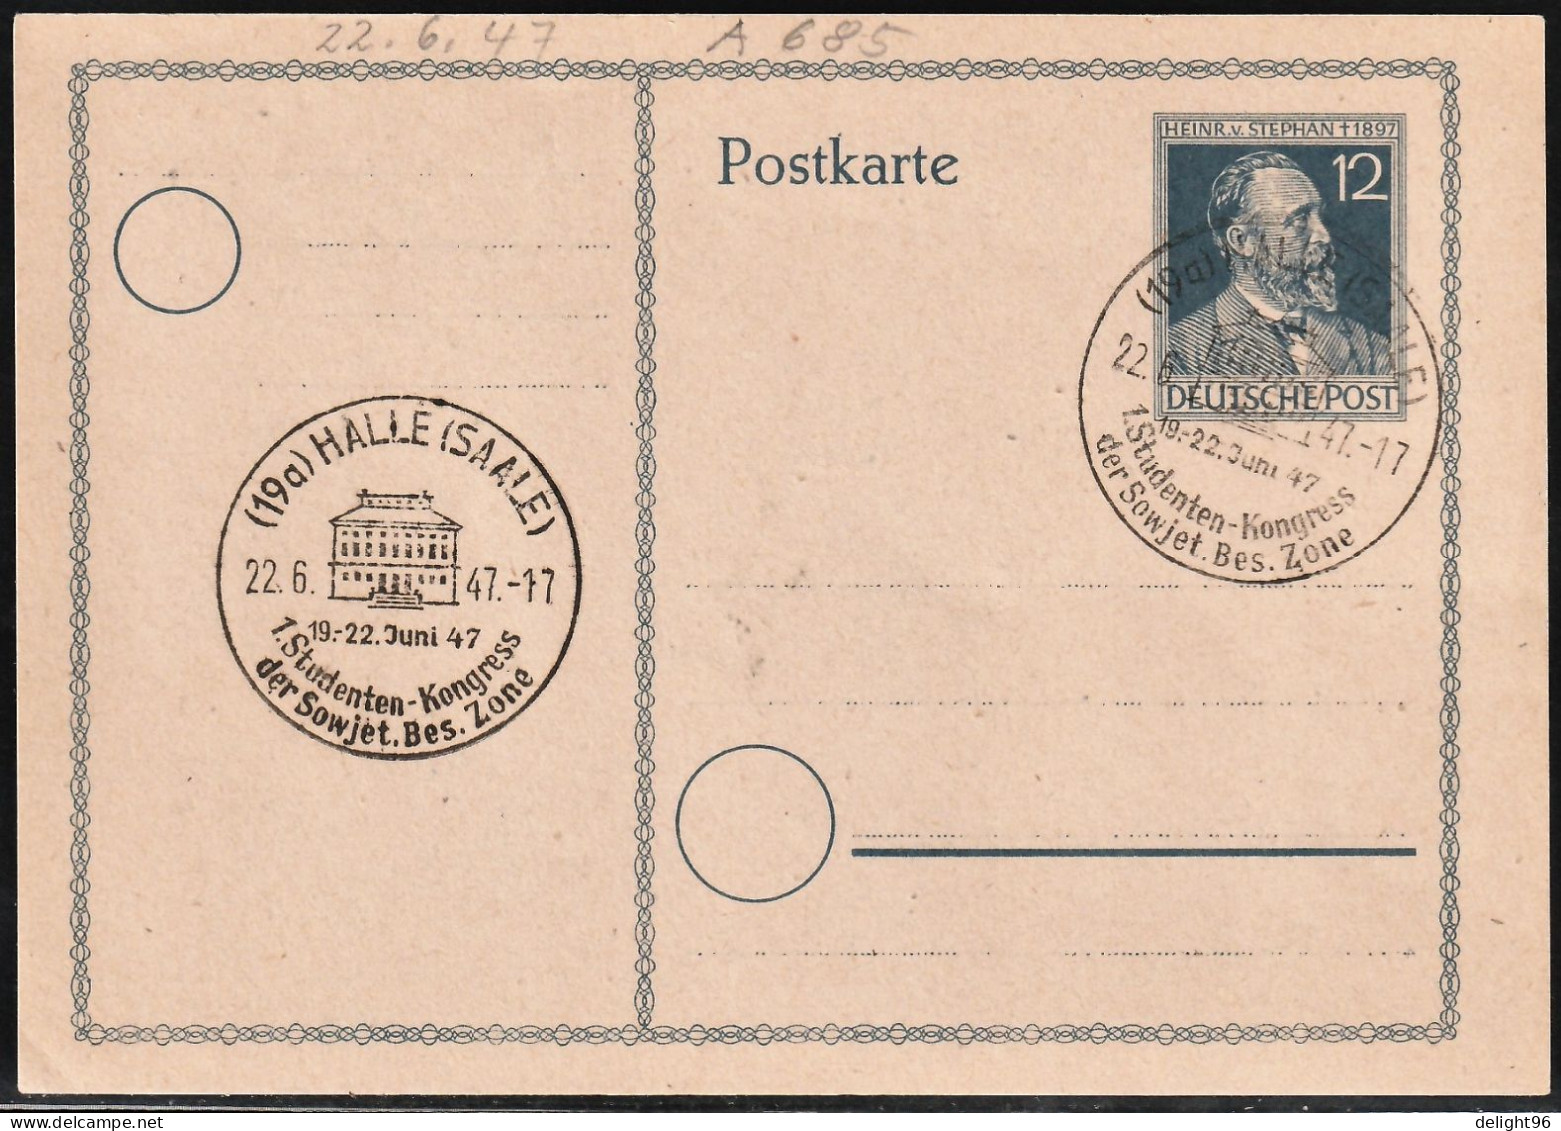 1947 Germany (Allied Joint Occupation Zone) Heinrich Stephan Postal Stationery With Commemorative Cancel - Ganzsachen